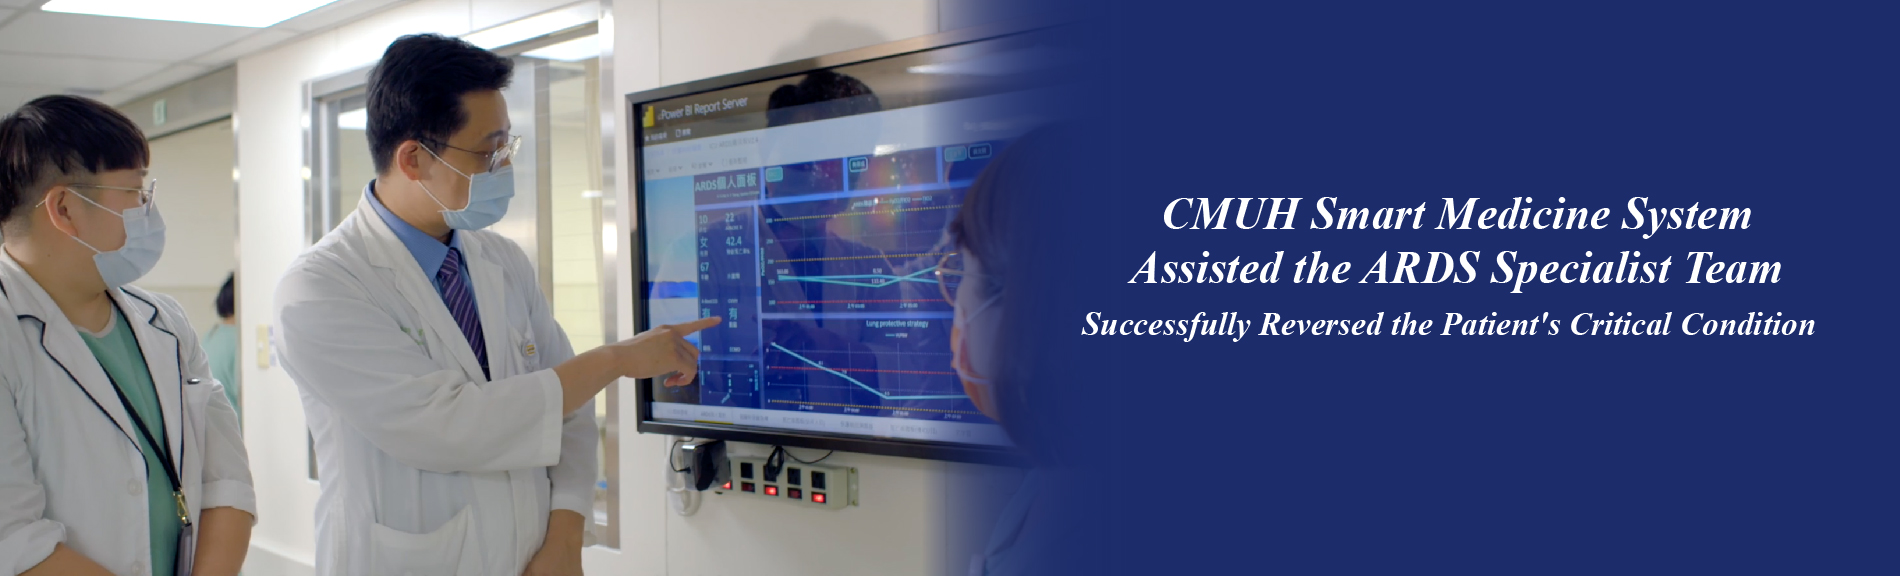 CMUH Smart Medicine System Assisted the ARDS Specialist Team